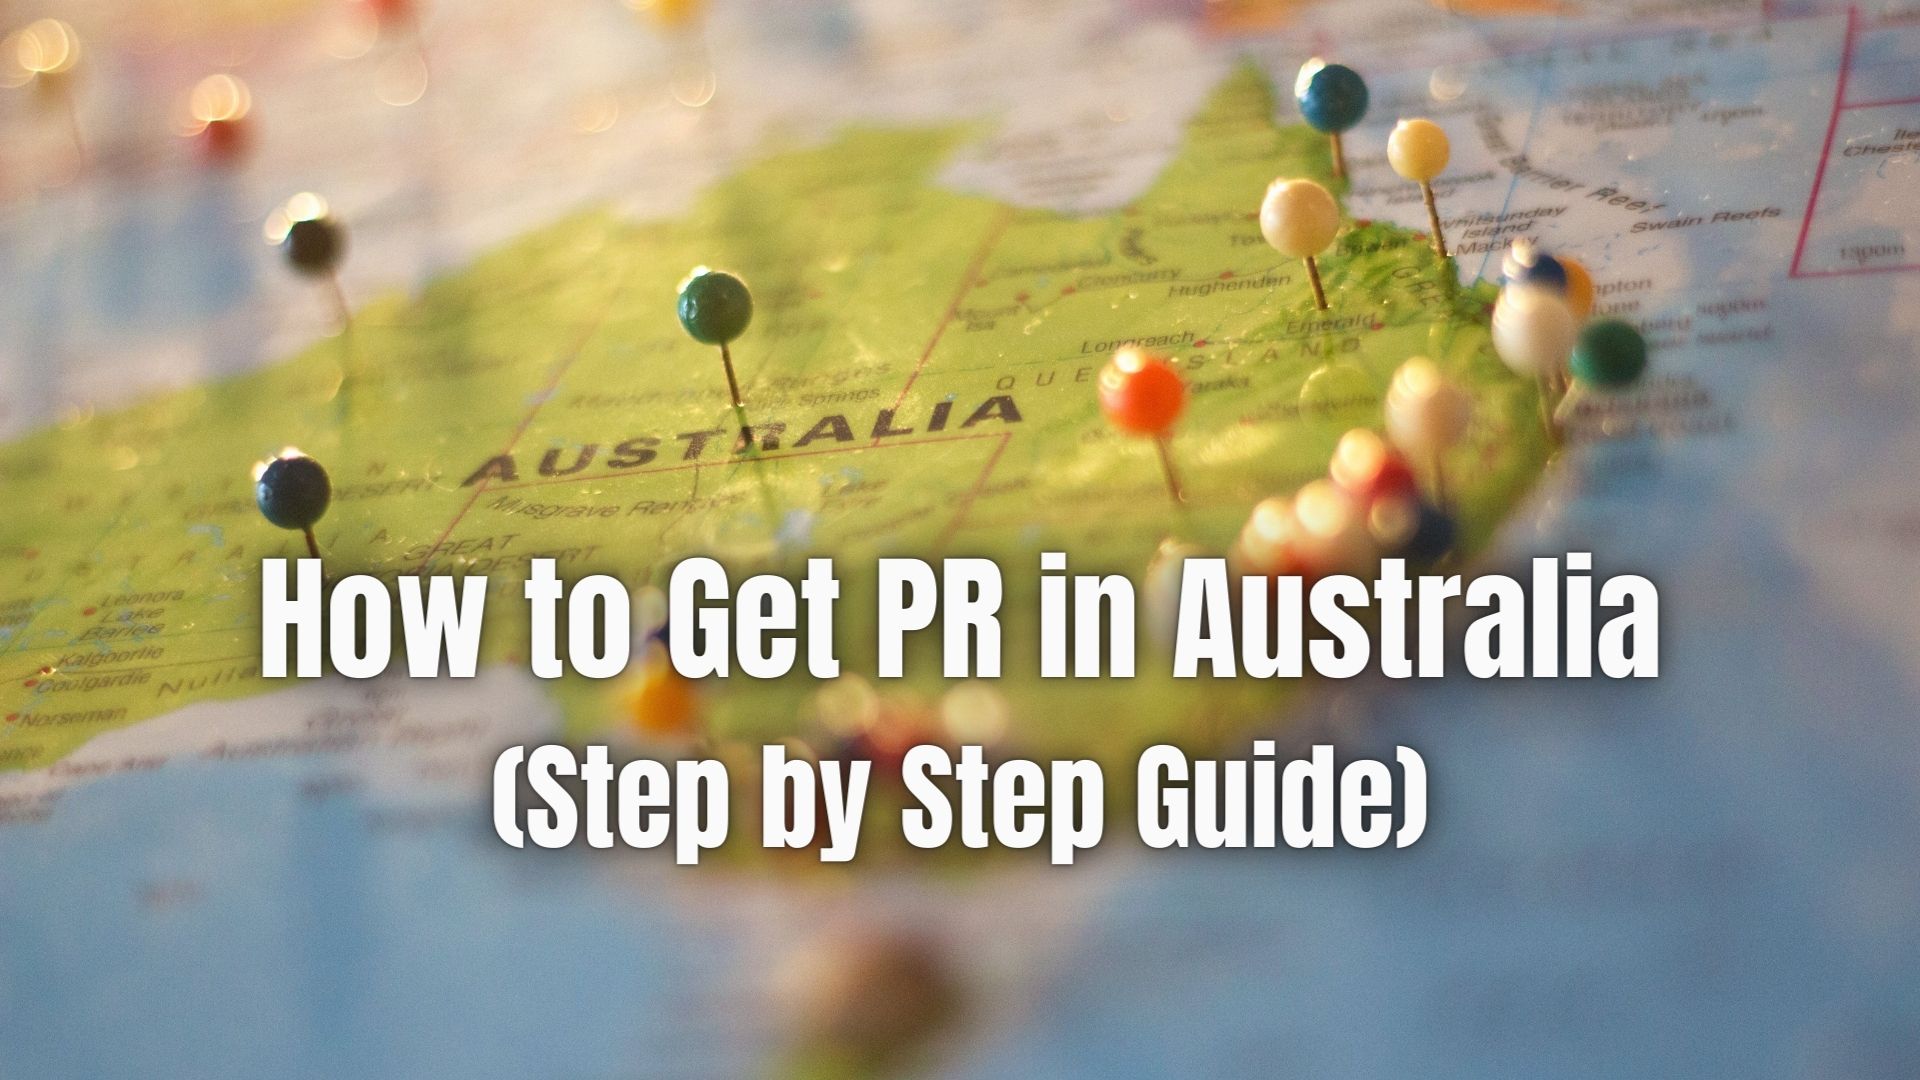 Ready for Aussie PR? Don't Miss Out! Our guide simplifies the complex PR process in Australia. Start your journey today!